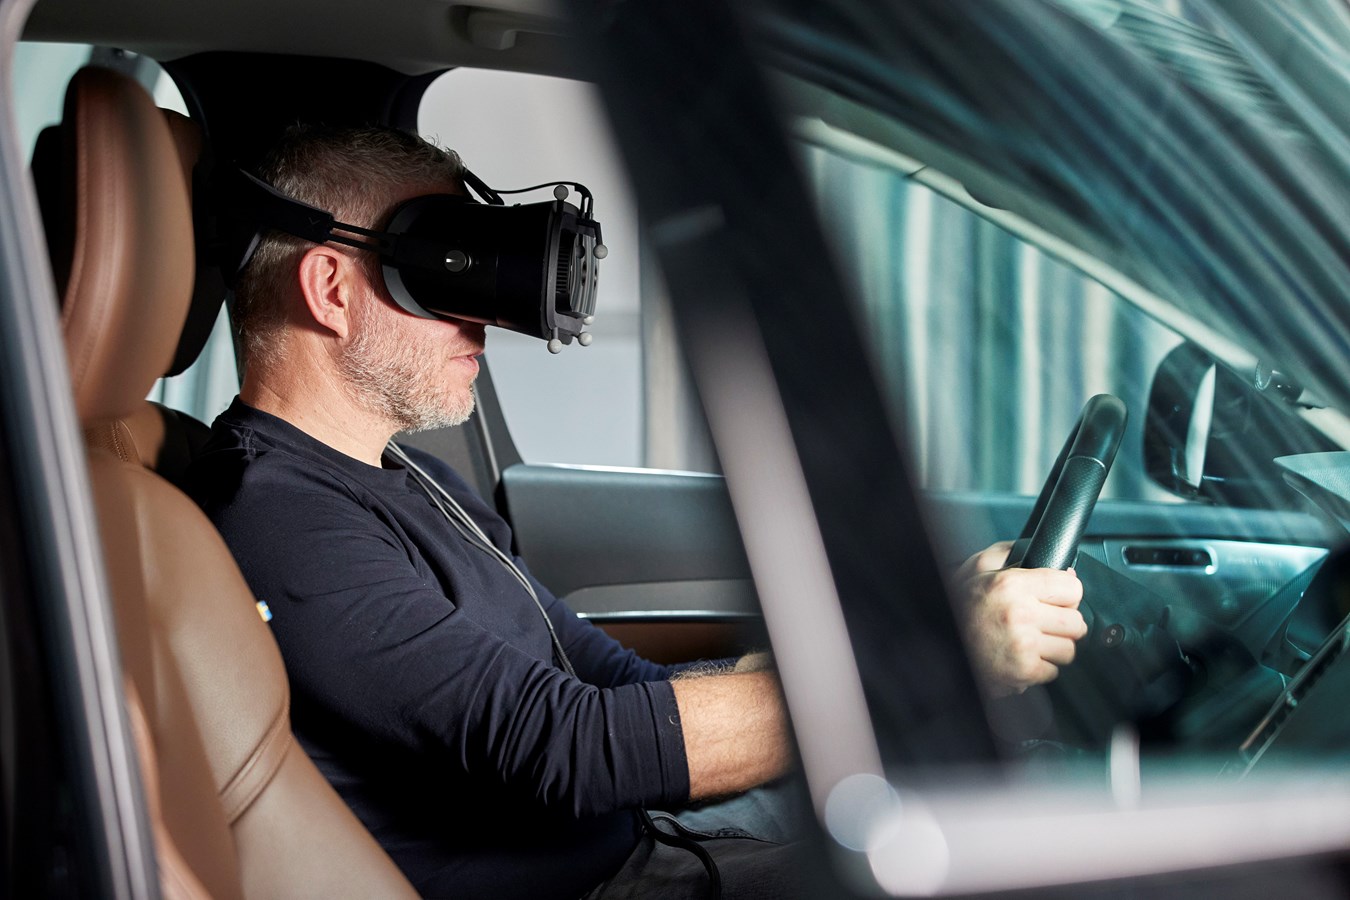 Volvo Cars “Ultimate Driving Simulator” Makes New Strides in Safety and Autonomous Driving Technology